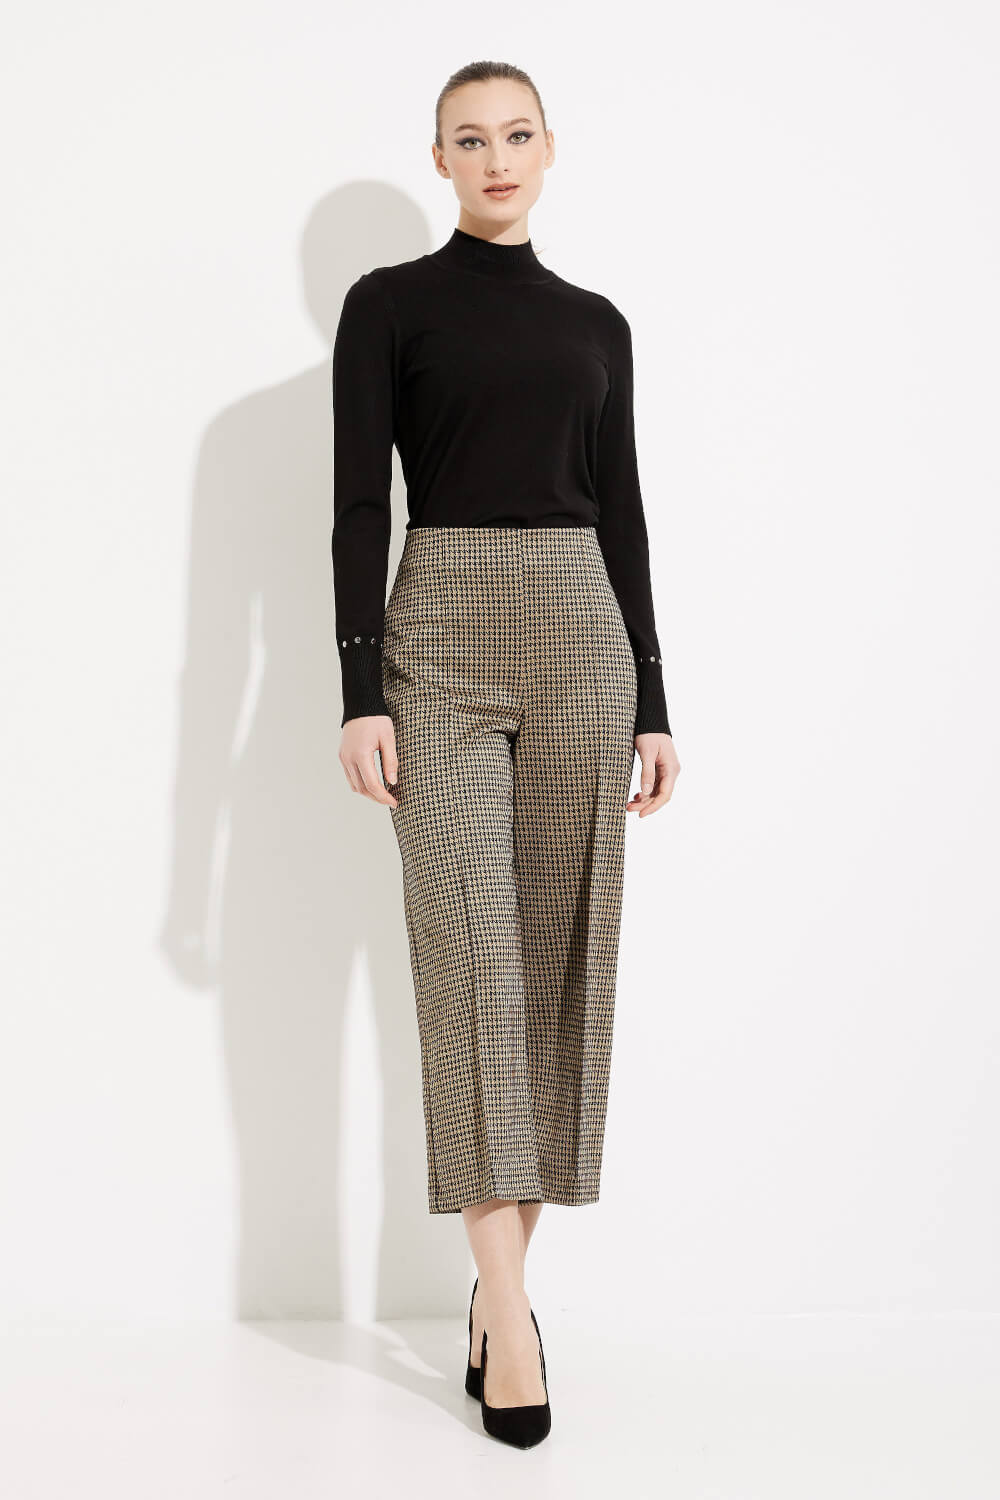 Houndstooth Culotte Pants Style 233249. Black/beige